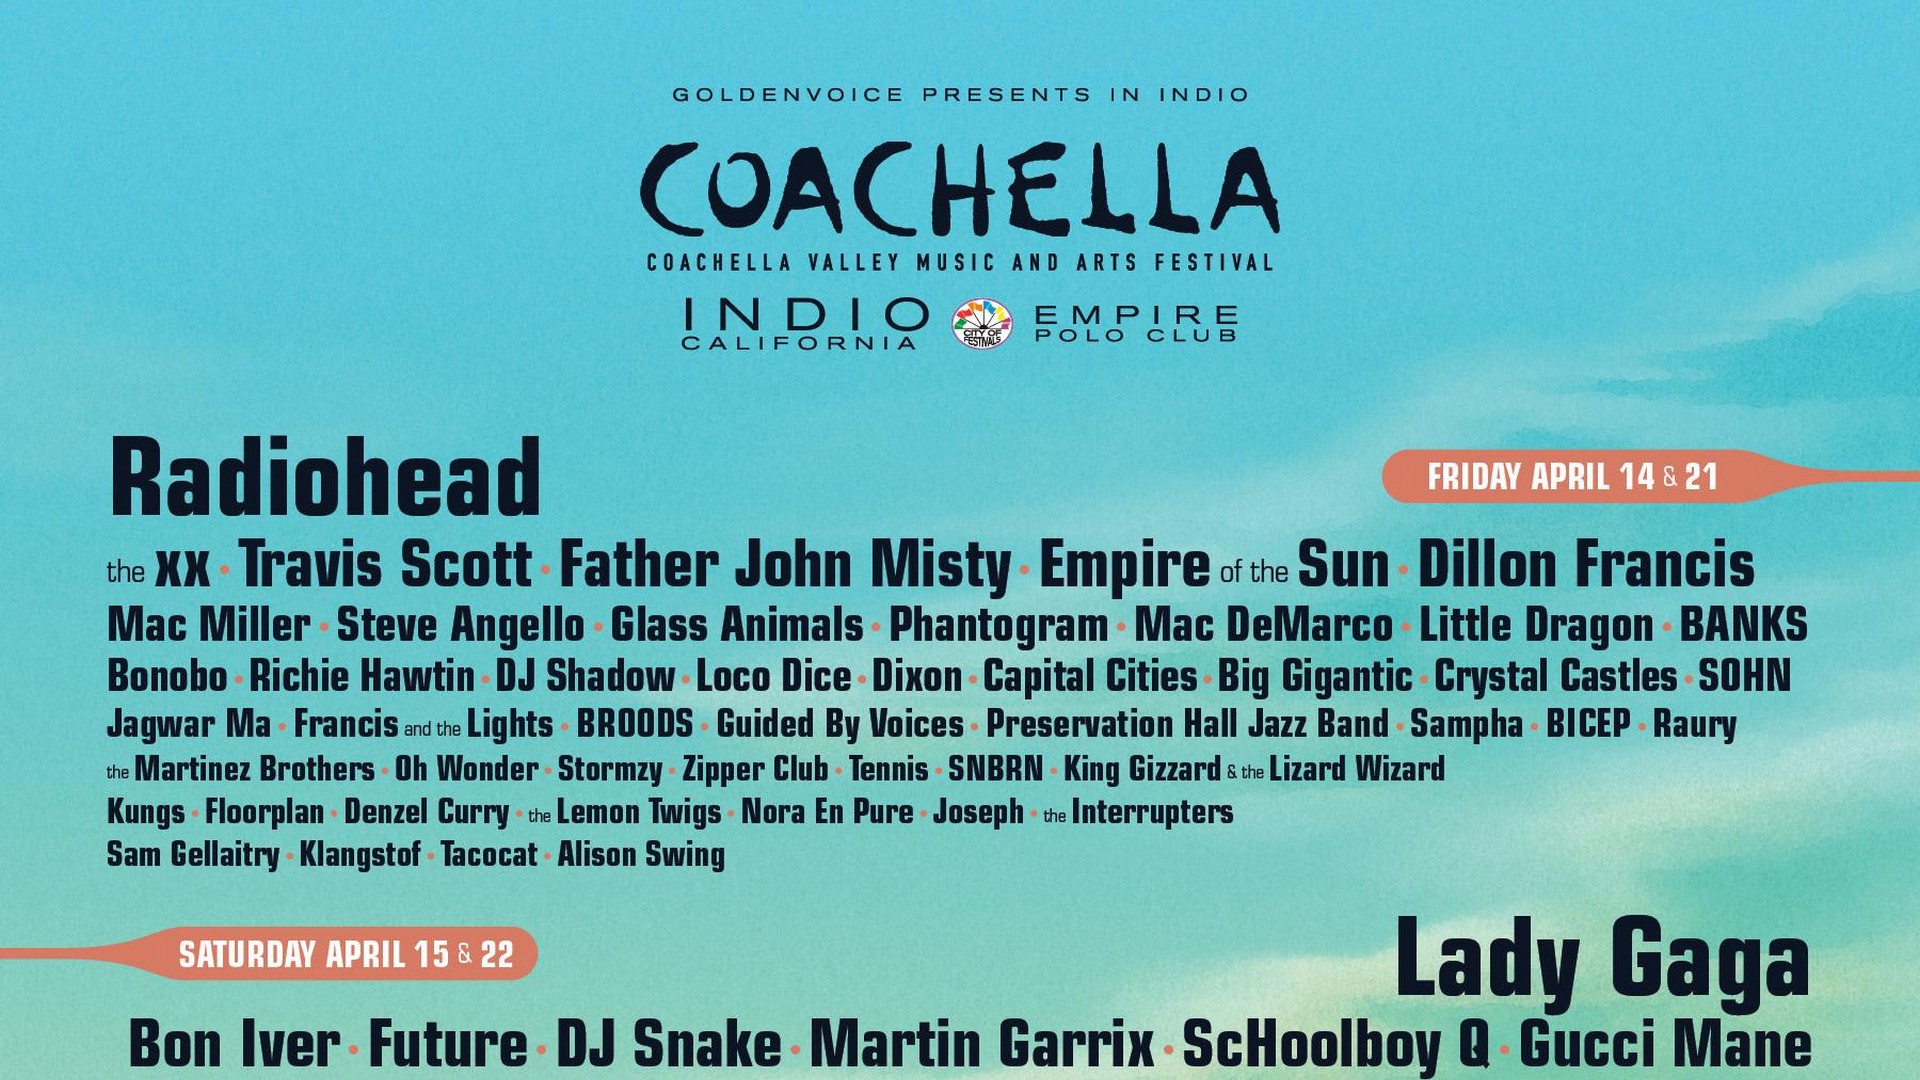 Wallpaper Coachella 2019 Desktop with high-resolution 1920x1080 pixel. You can use this wallpaper for your Windows and Mac OS computers as well as your Android and iPhone smartphones